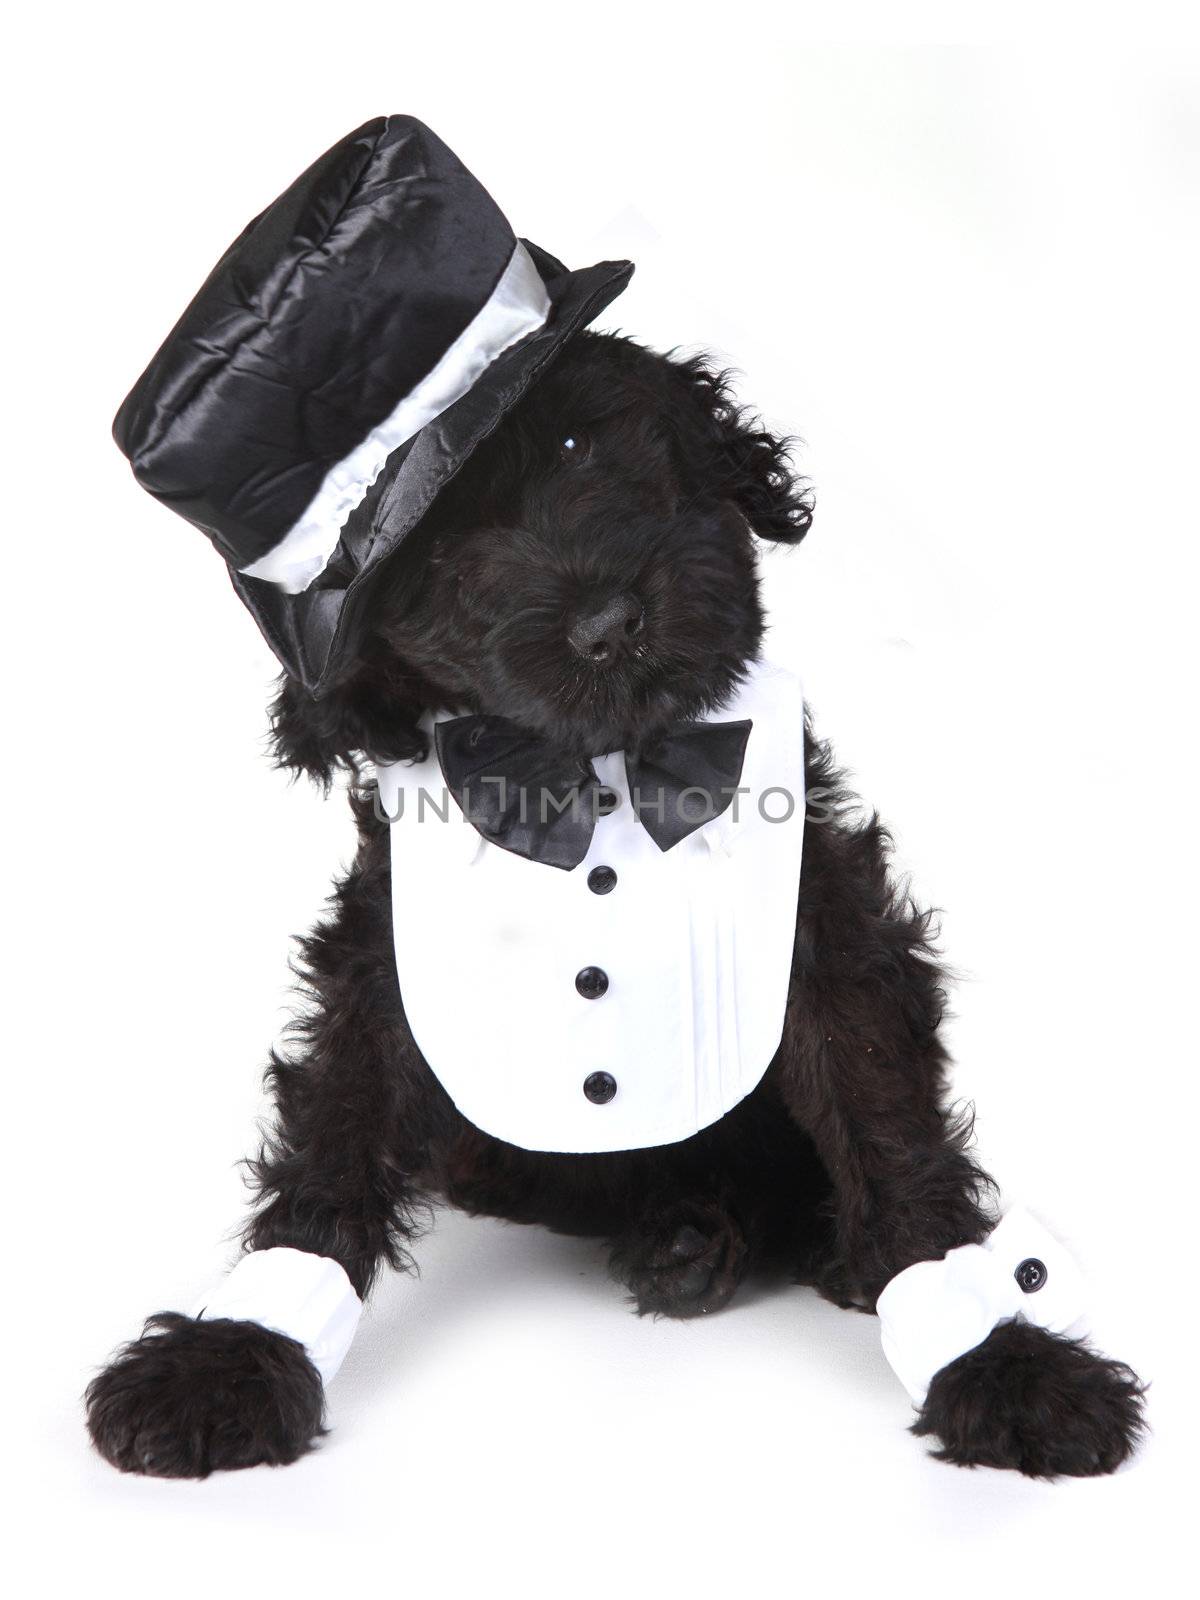 Black Russian Terrier Puppy Dog on White Background